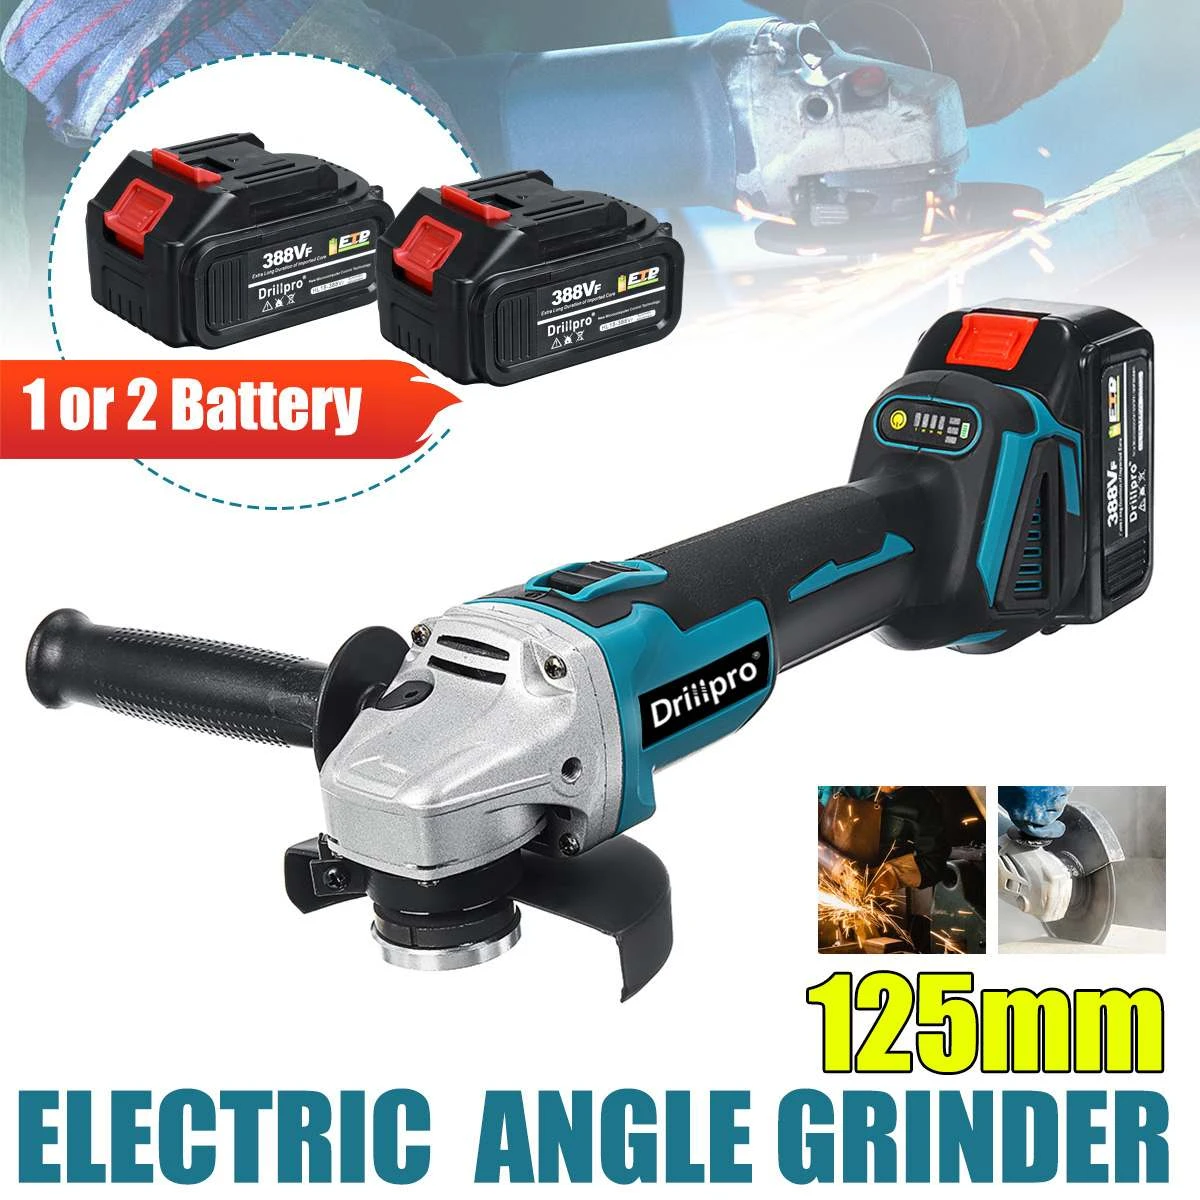 125MM Brushless Angle Grinder Cutting Machine Electric Grinder Power Tool with 1/2 Lithium-Ion Battery for Makita 18V Battery